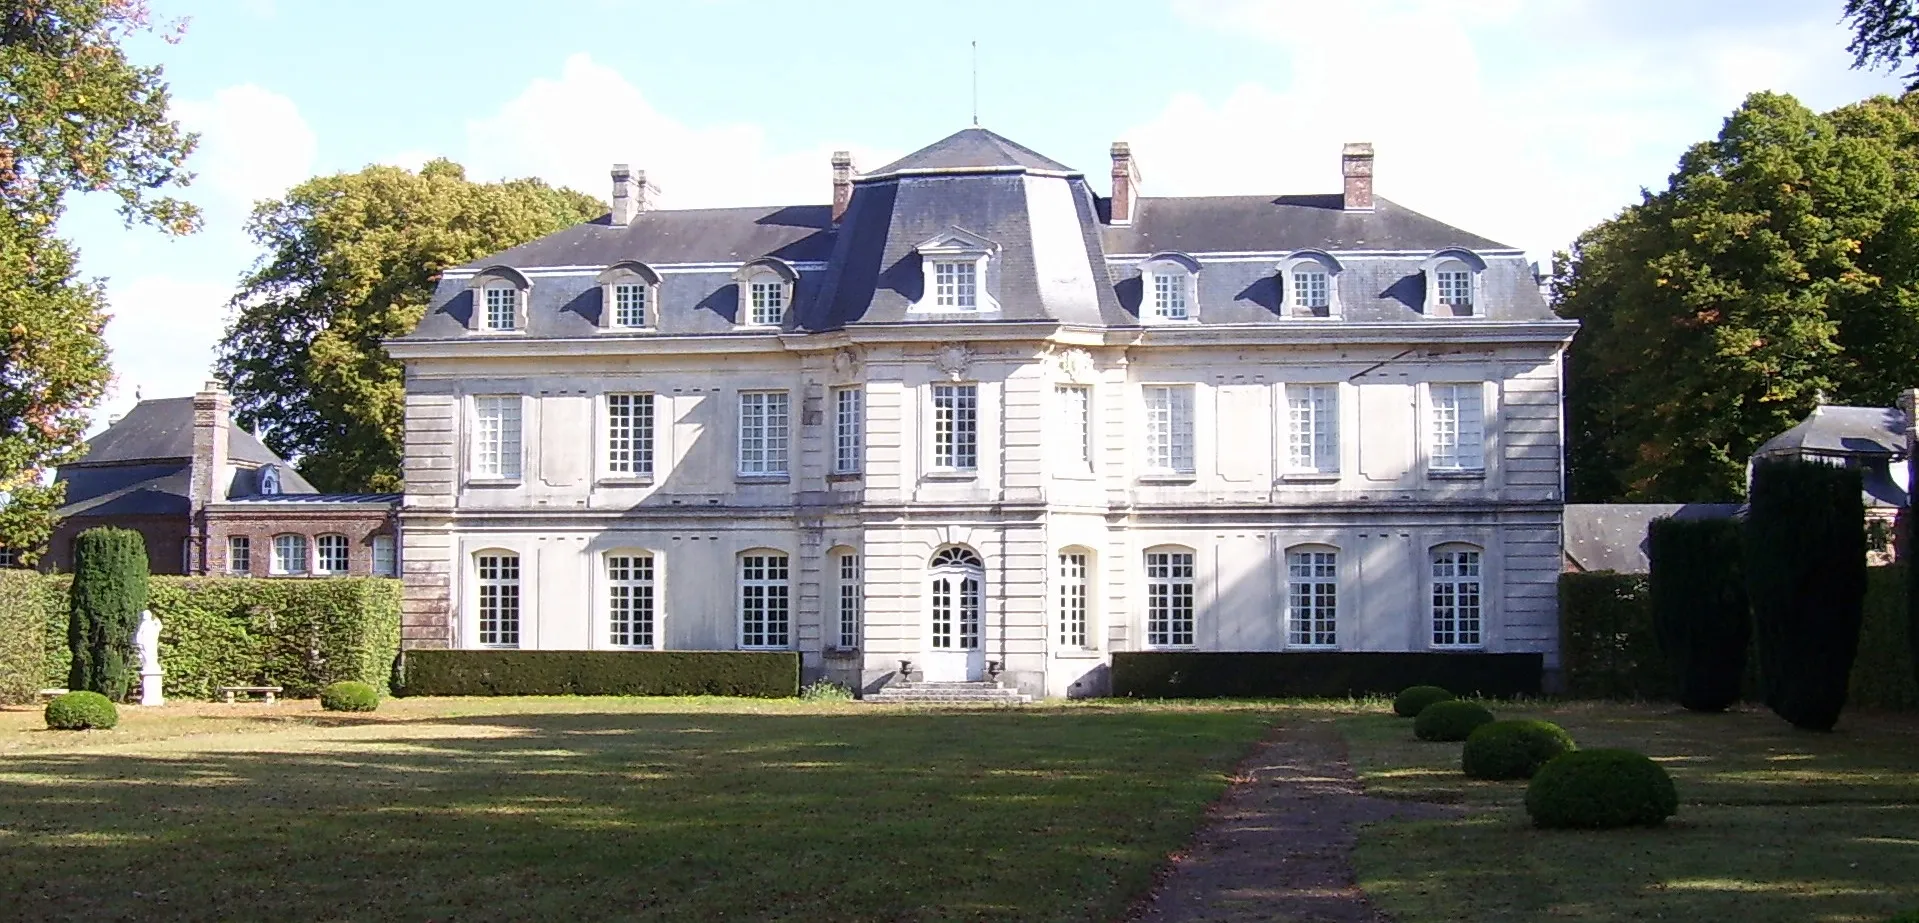 Photo showing: The castle of Launay was built around 1730 and replaced an older castle. It is situated near Saint-Georges-du-Vièvre in the département Eure in the region Haute-Normandie of France.